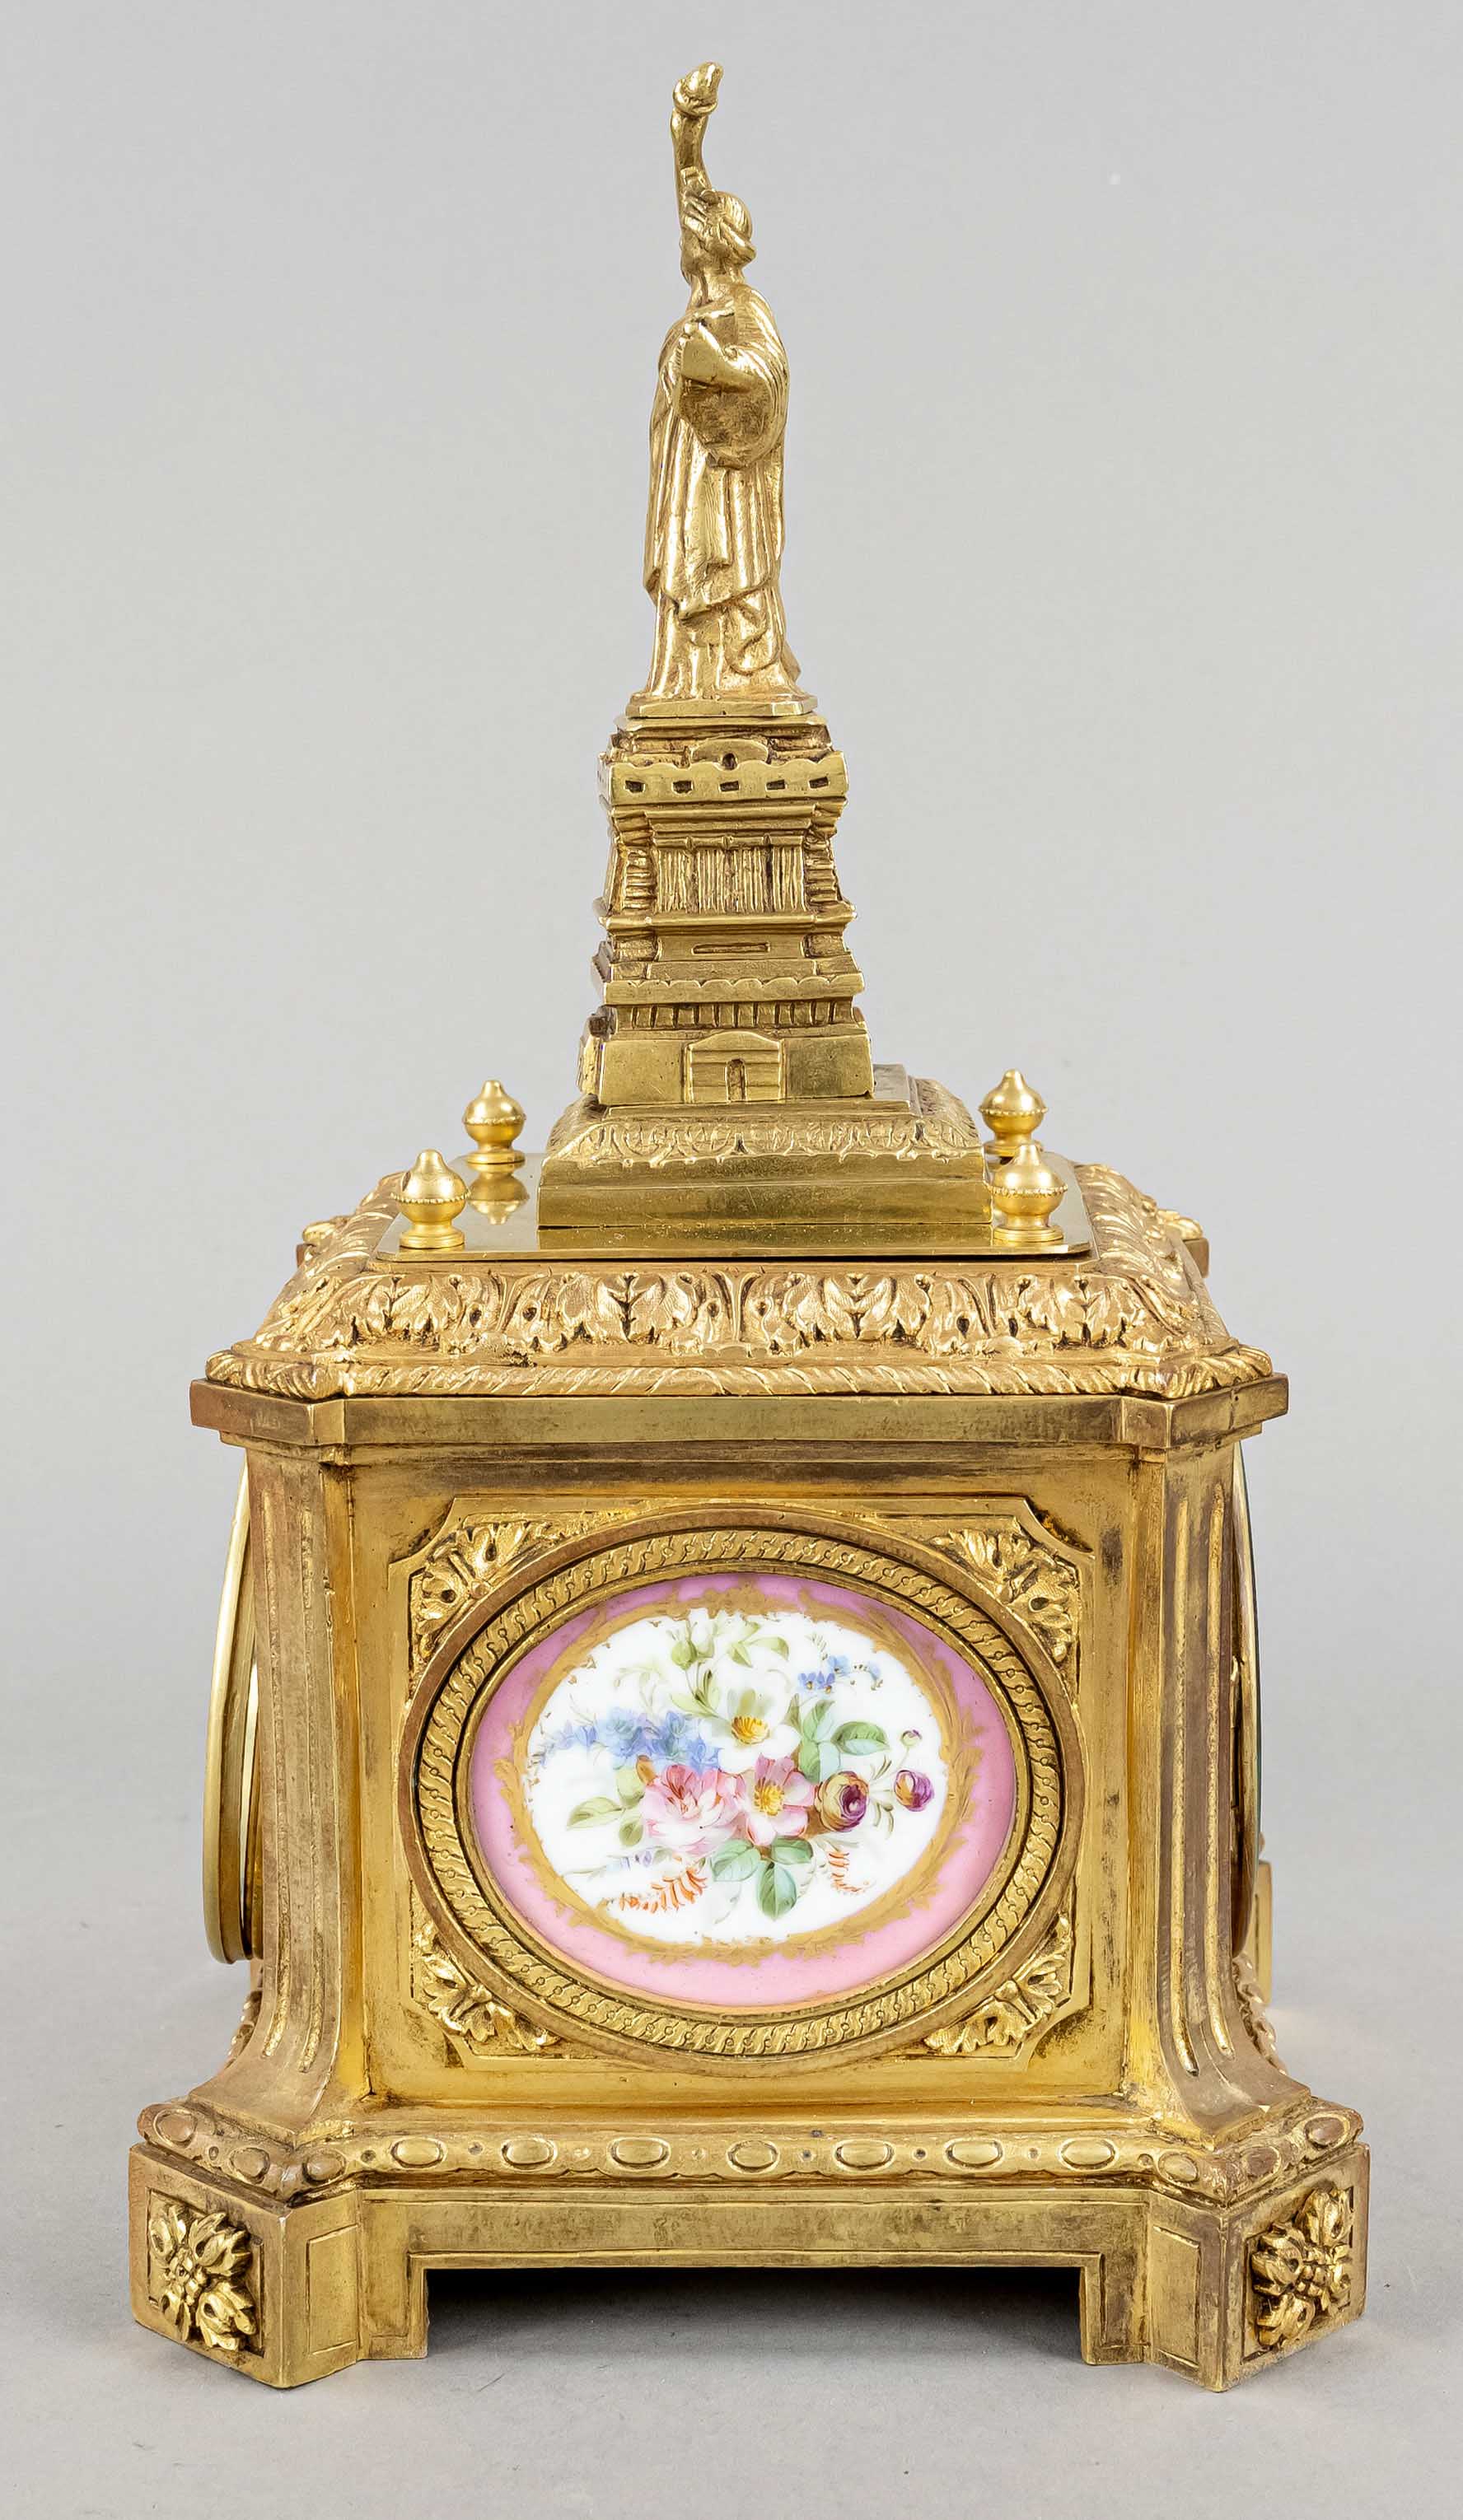 qudratic figure pendulum, with statue of joy, 2nd half of 19th century, case decorated with leaves - Image 3 of 3